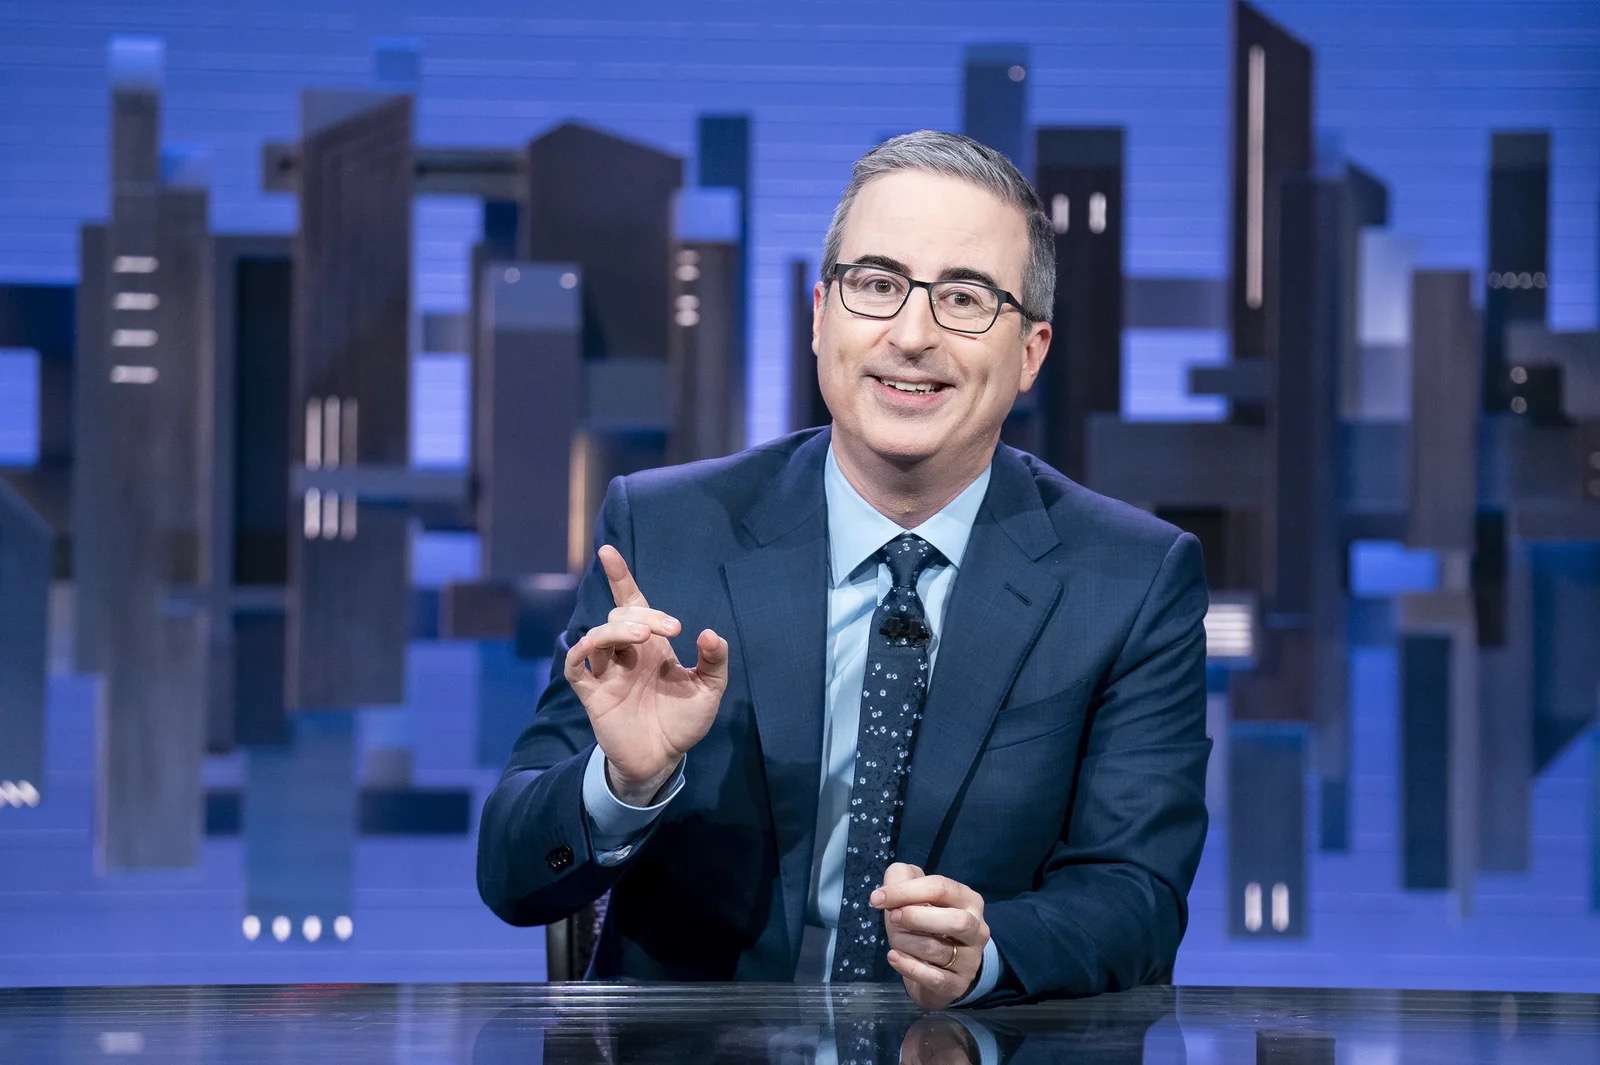 10 Surprising Fun Facts About John Oliver and His Hit Satirical Show